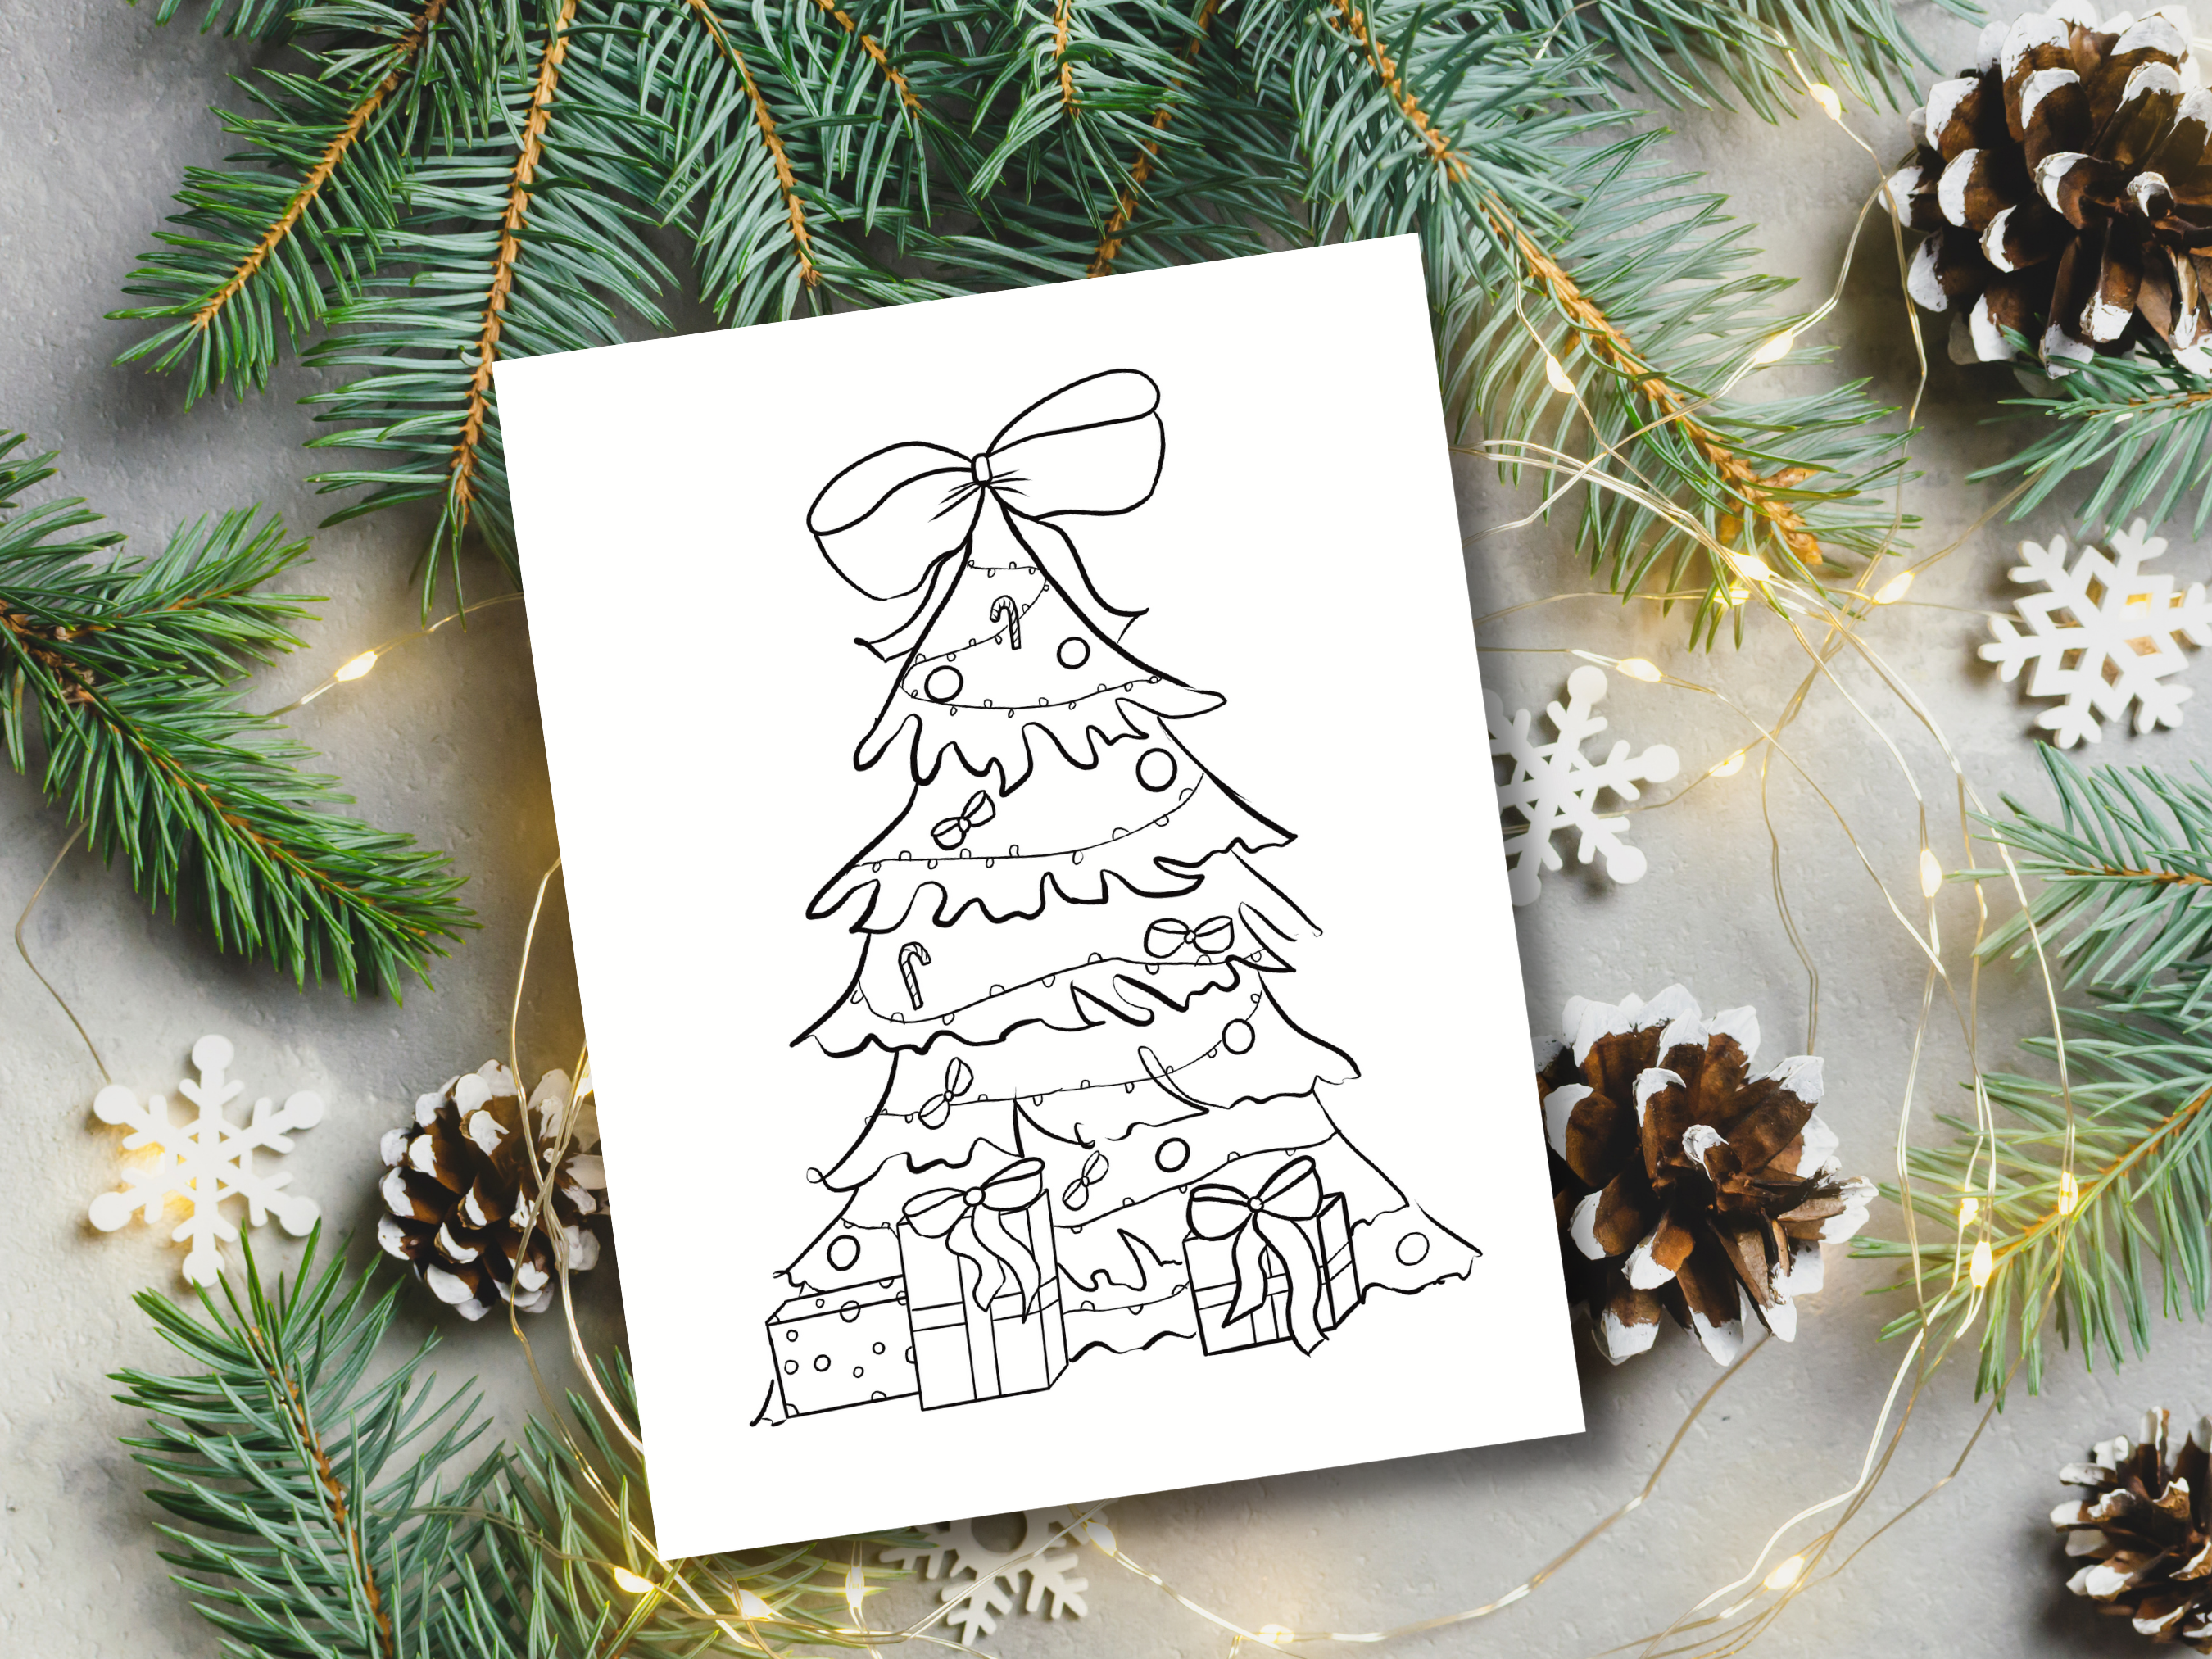 Christmas Card Set of 10 - COLOR YOUR OWN